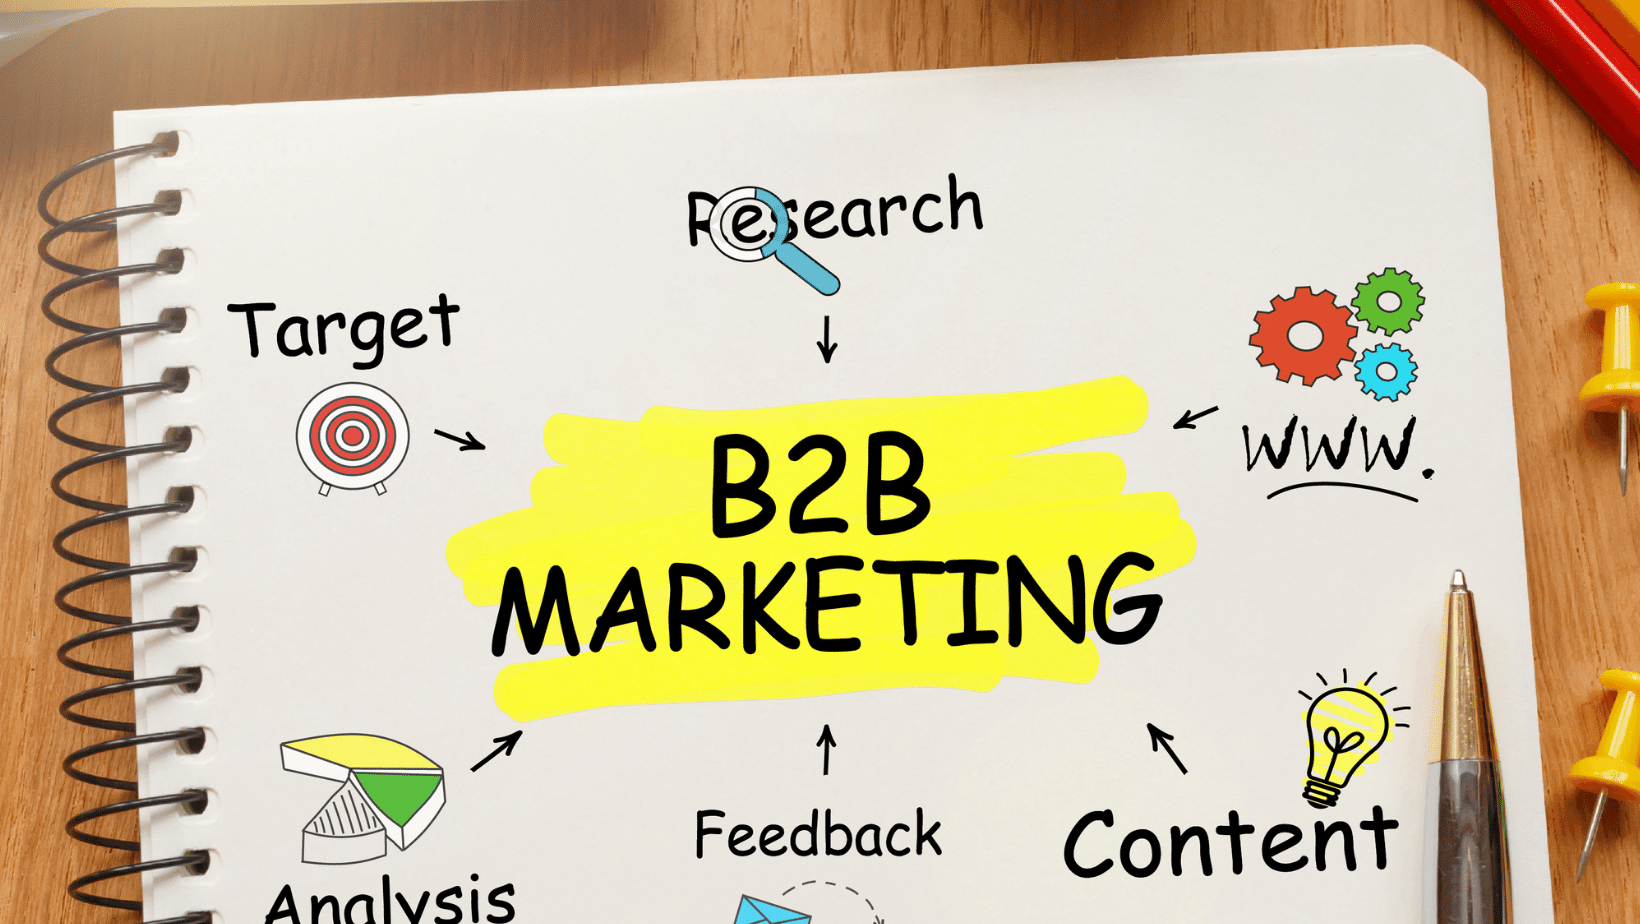 Ascend Adwerks' notebook with 'B2B Marketing' surrounded by several marketing terms and icons.